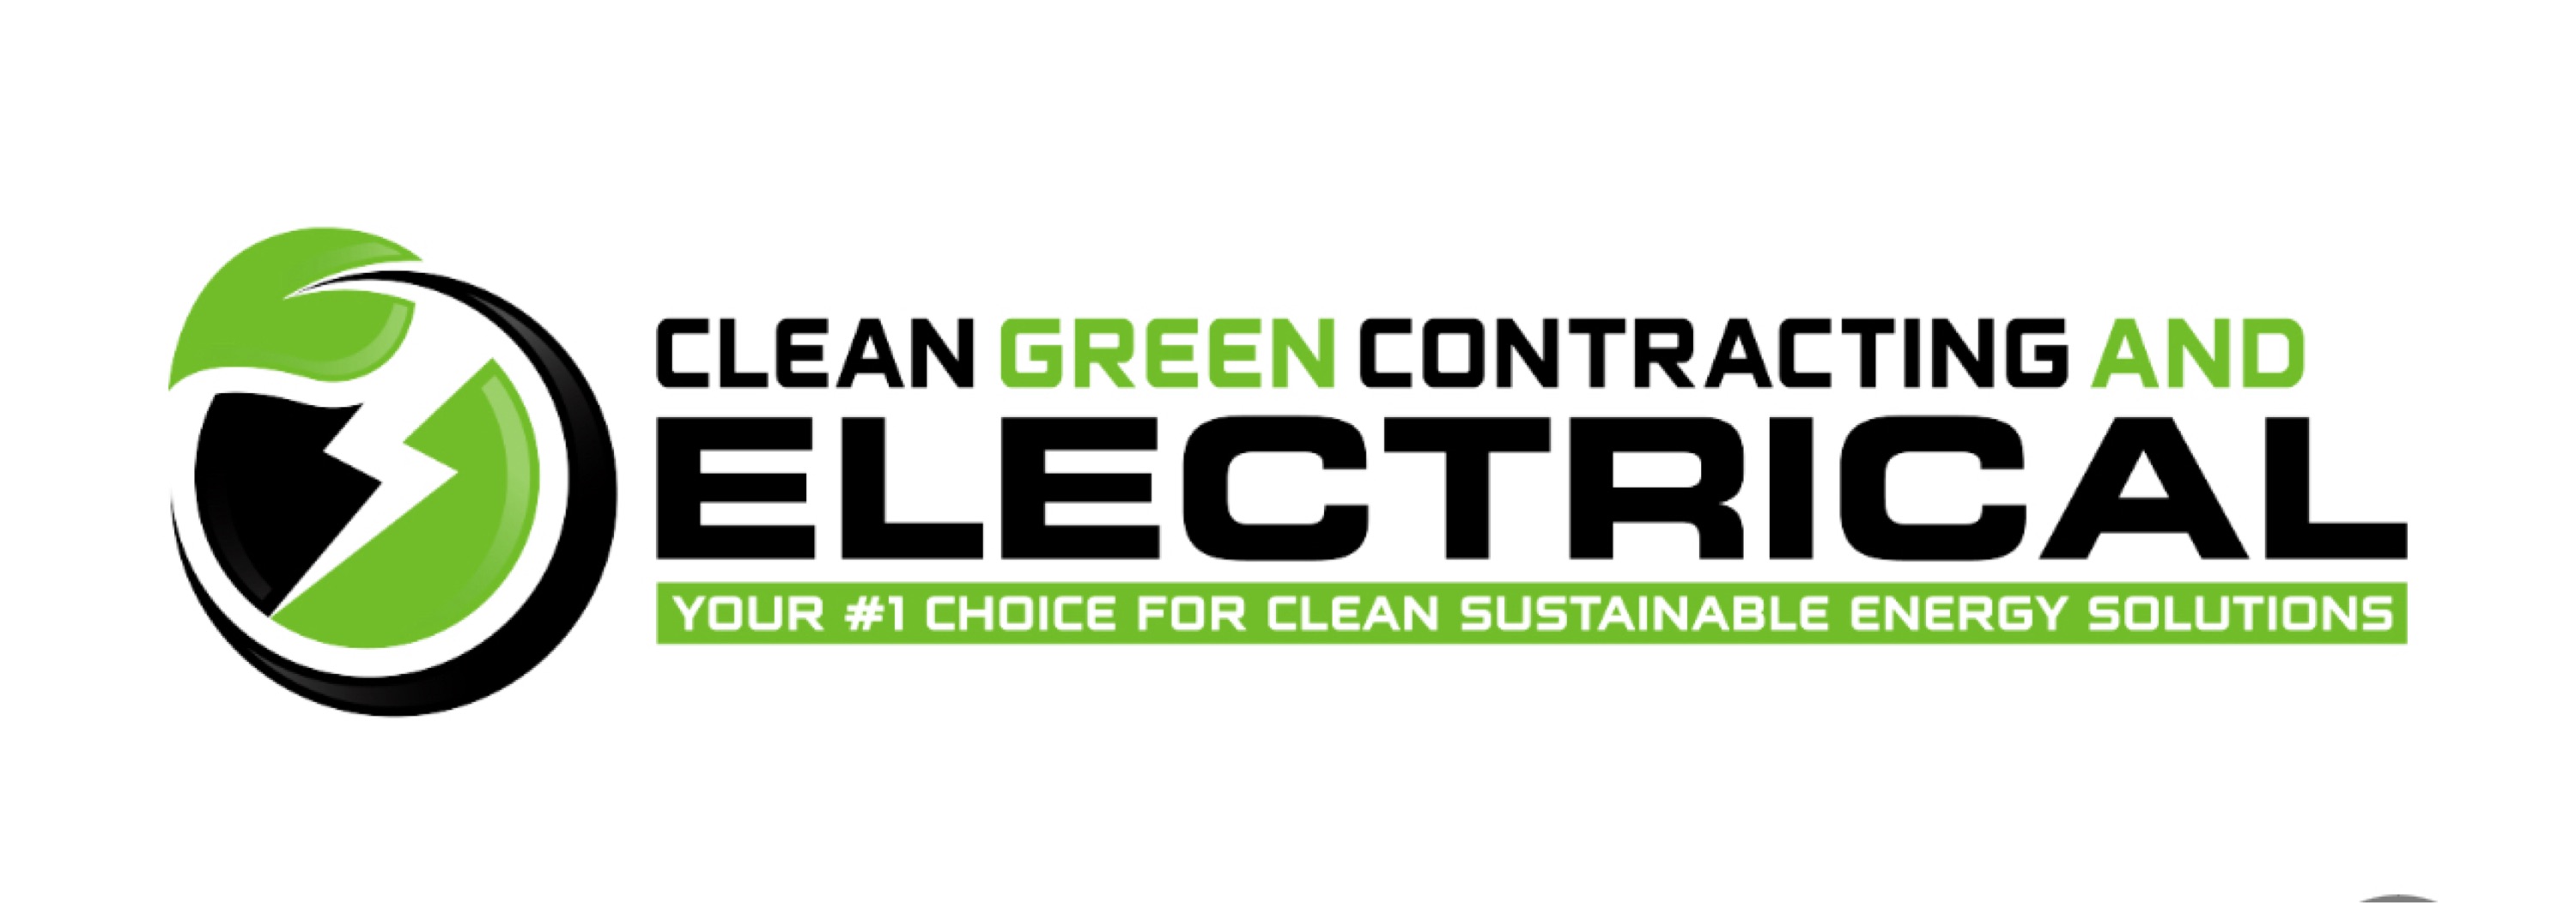 Clean Green Contracting and Electrical LLC Logo